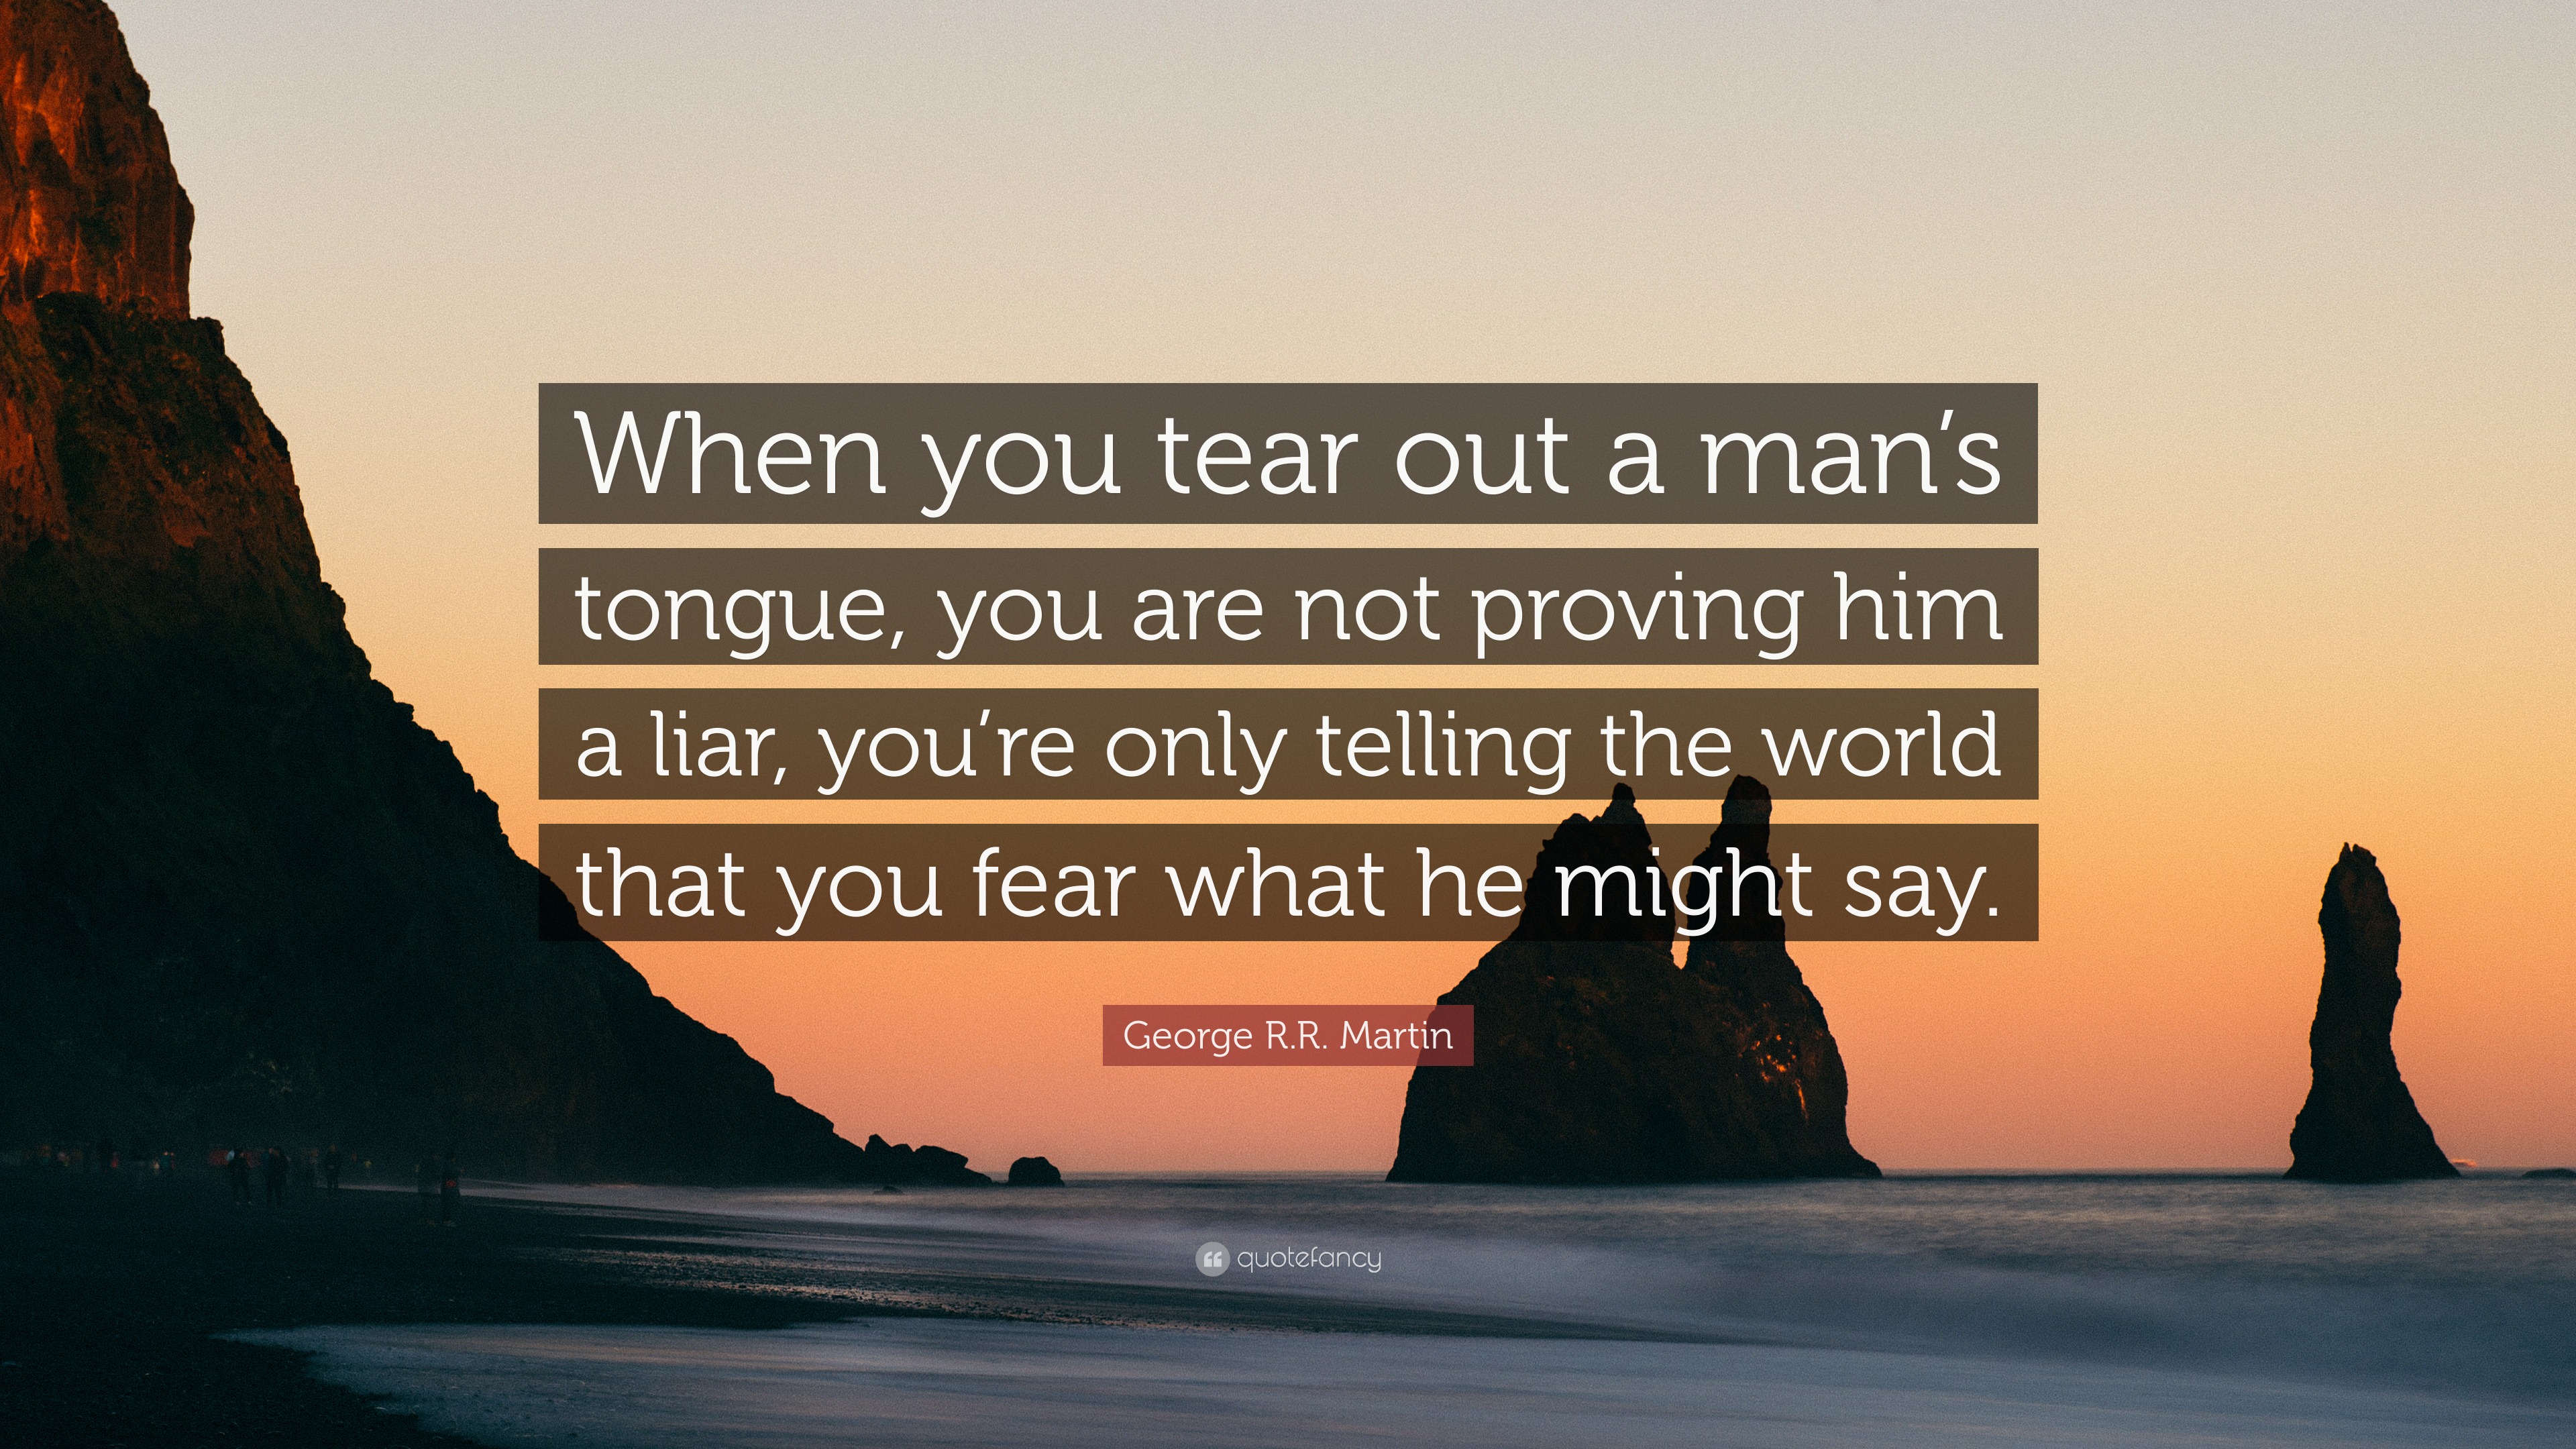 George R R Martin Quote When You Tear Out A Man S Tongue You Are Not Proving Him A Liar You Re Only Telling The World That You Fear What He Mi